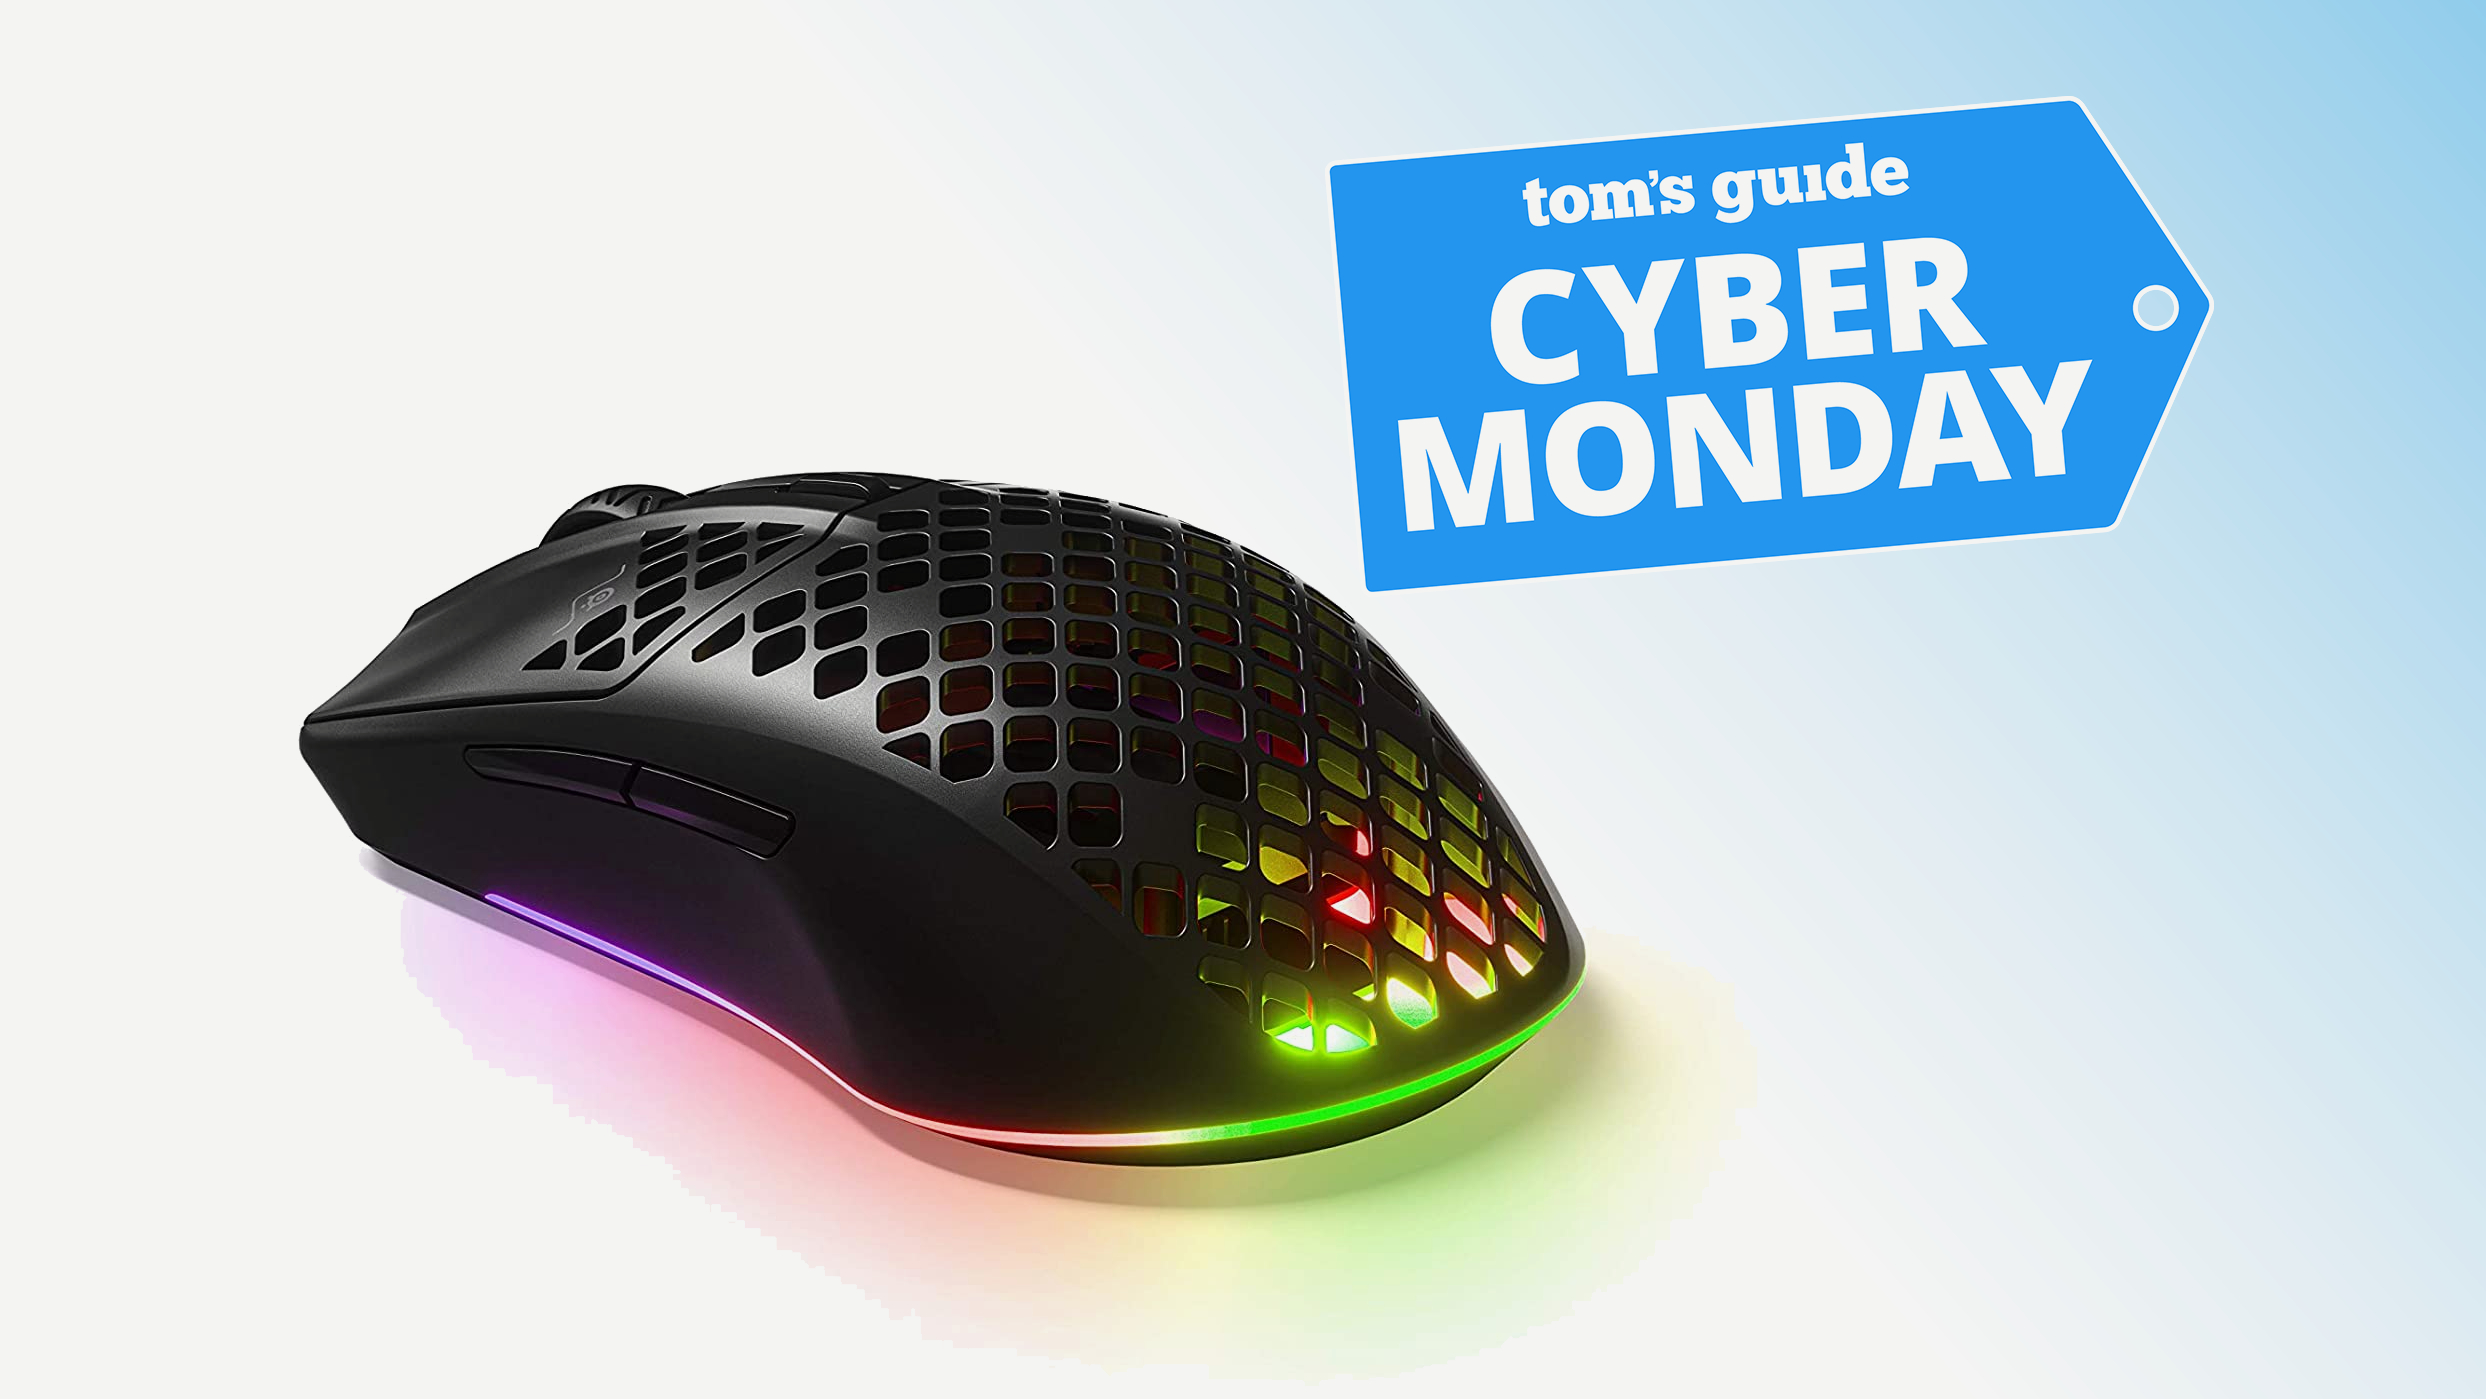 SteelSeries Aerox 3 Wireless mouse with cyber monday tag superimposed